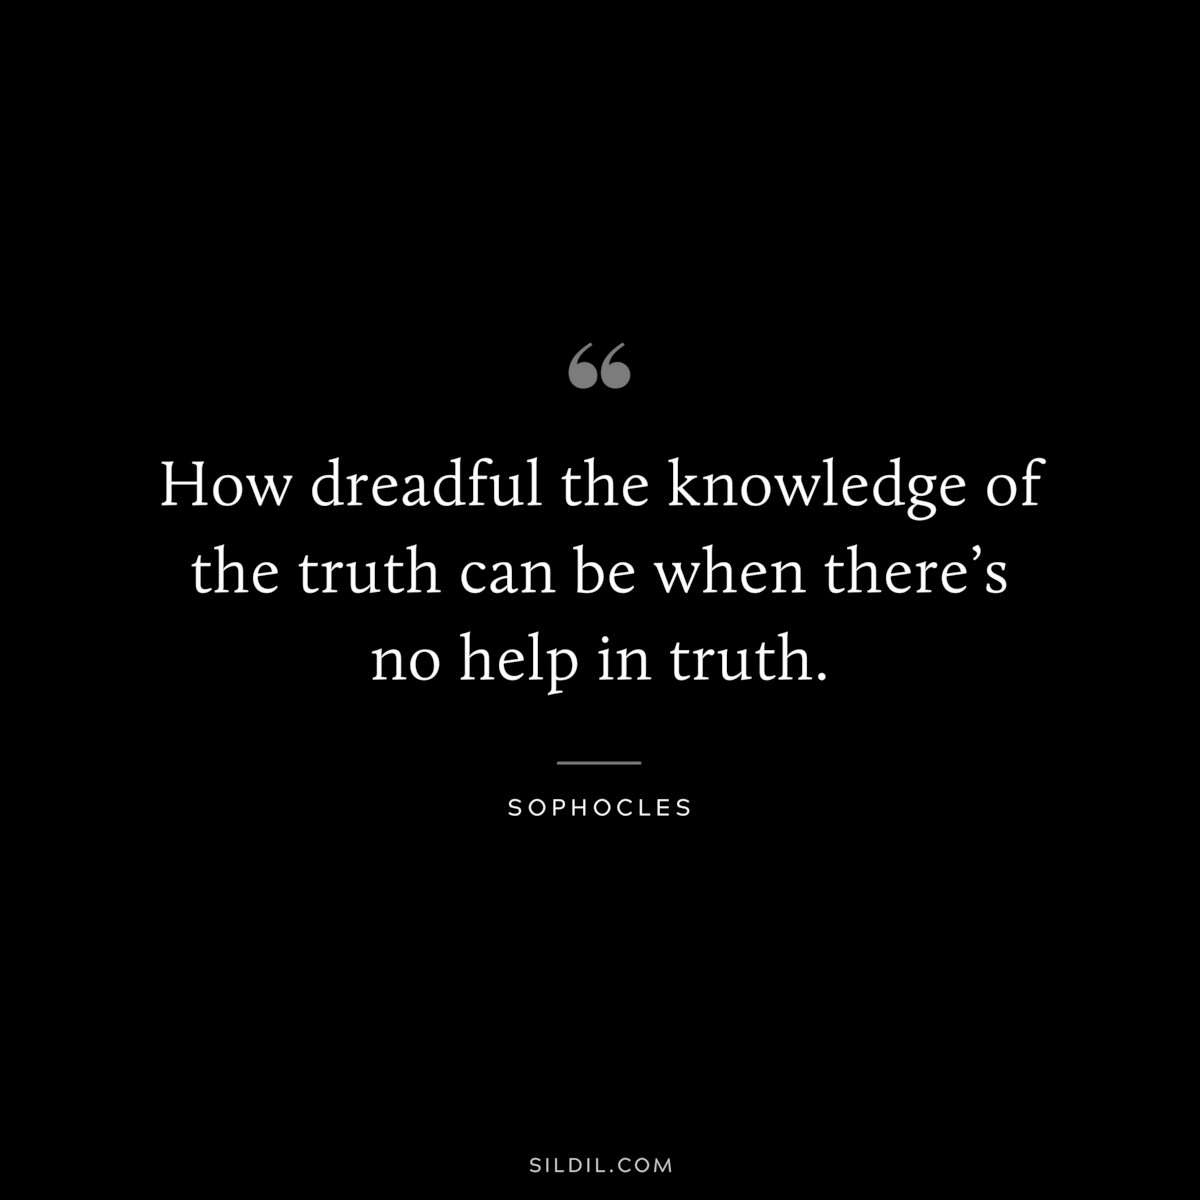 How dreadful the knowledge of the truth can be when there’s no help in truth. ― Sophocles